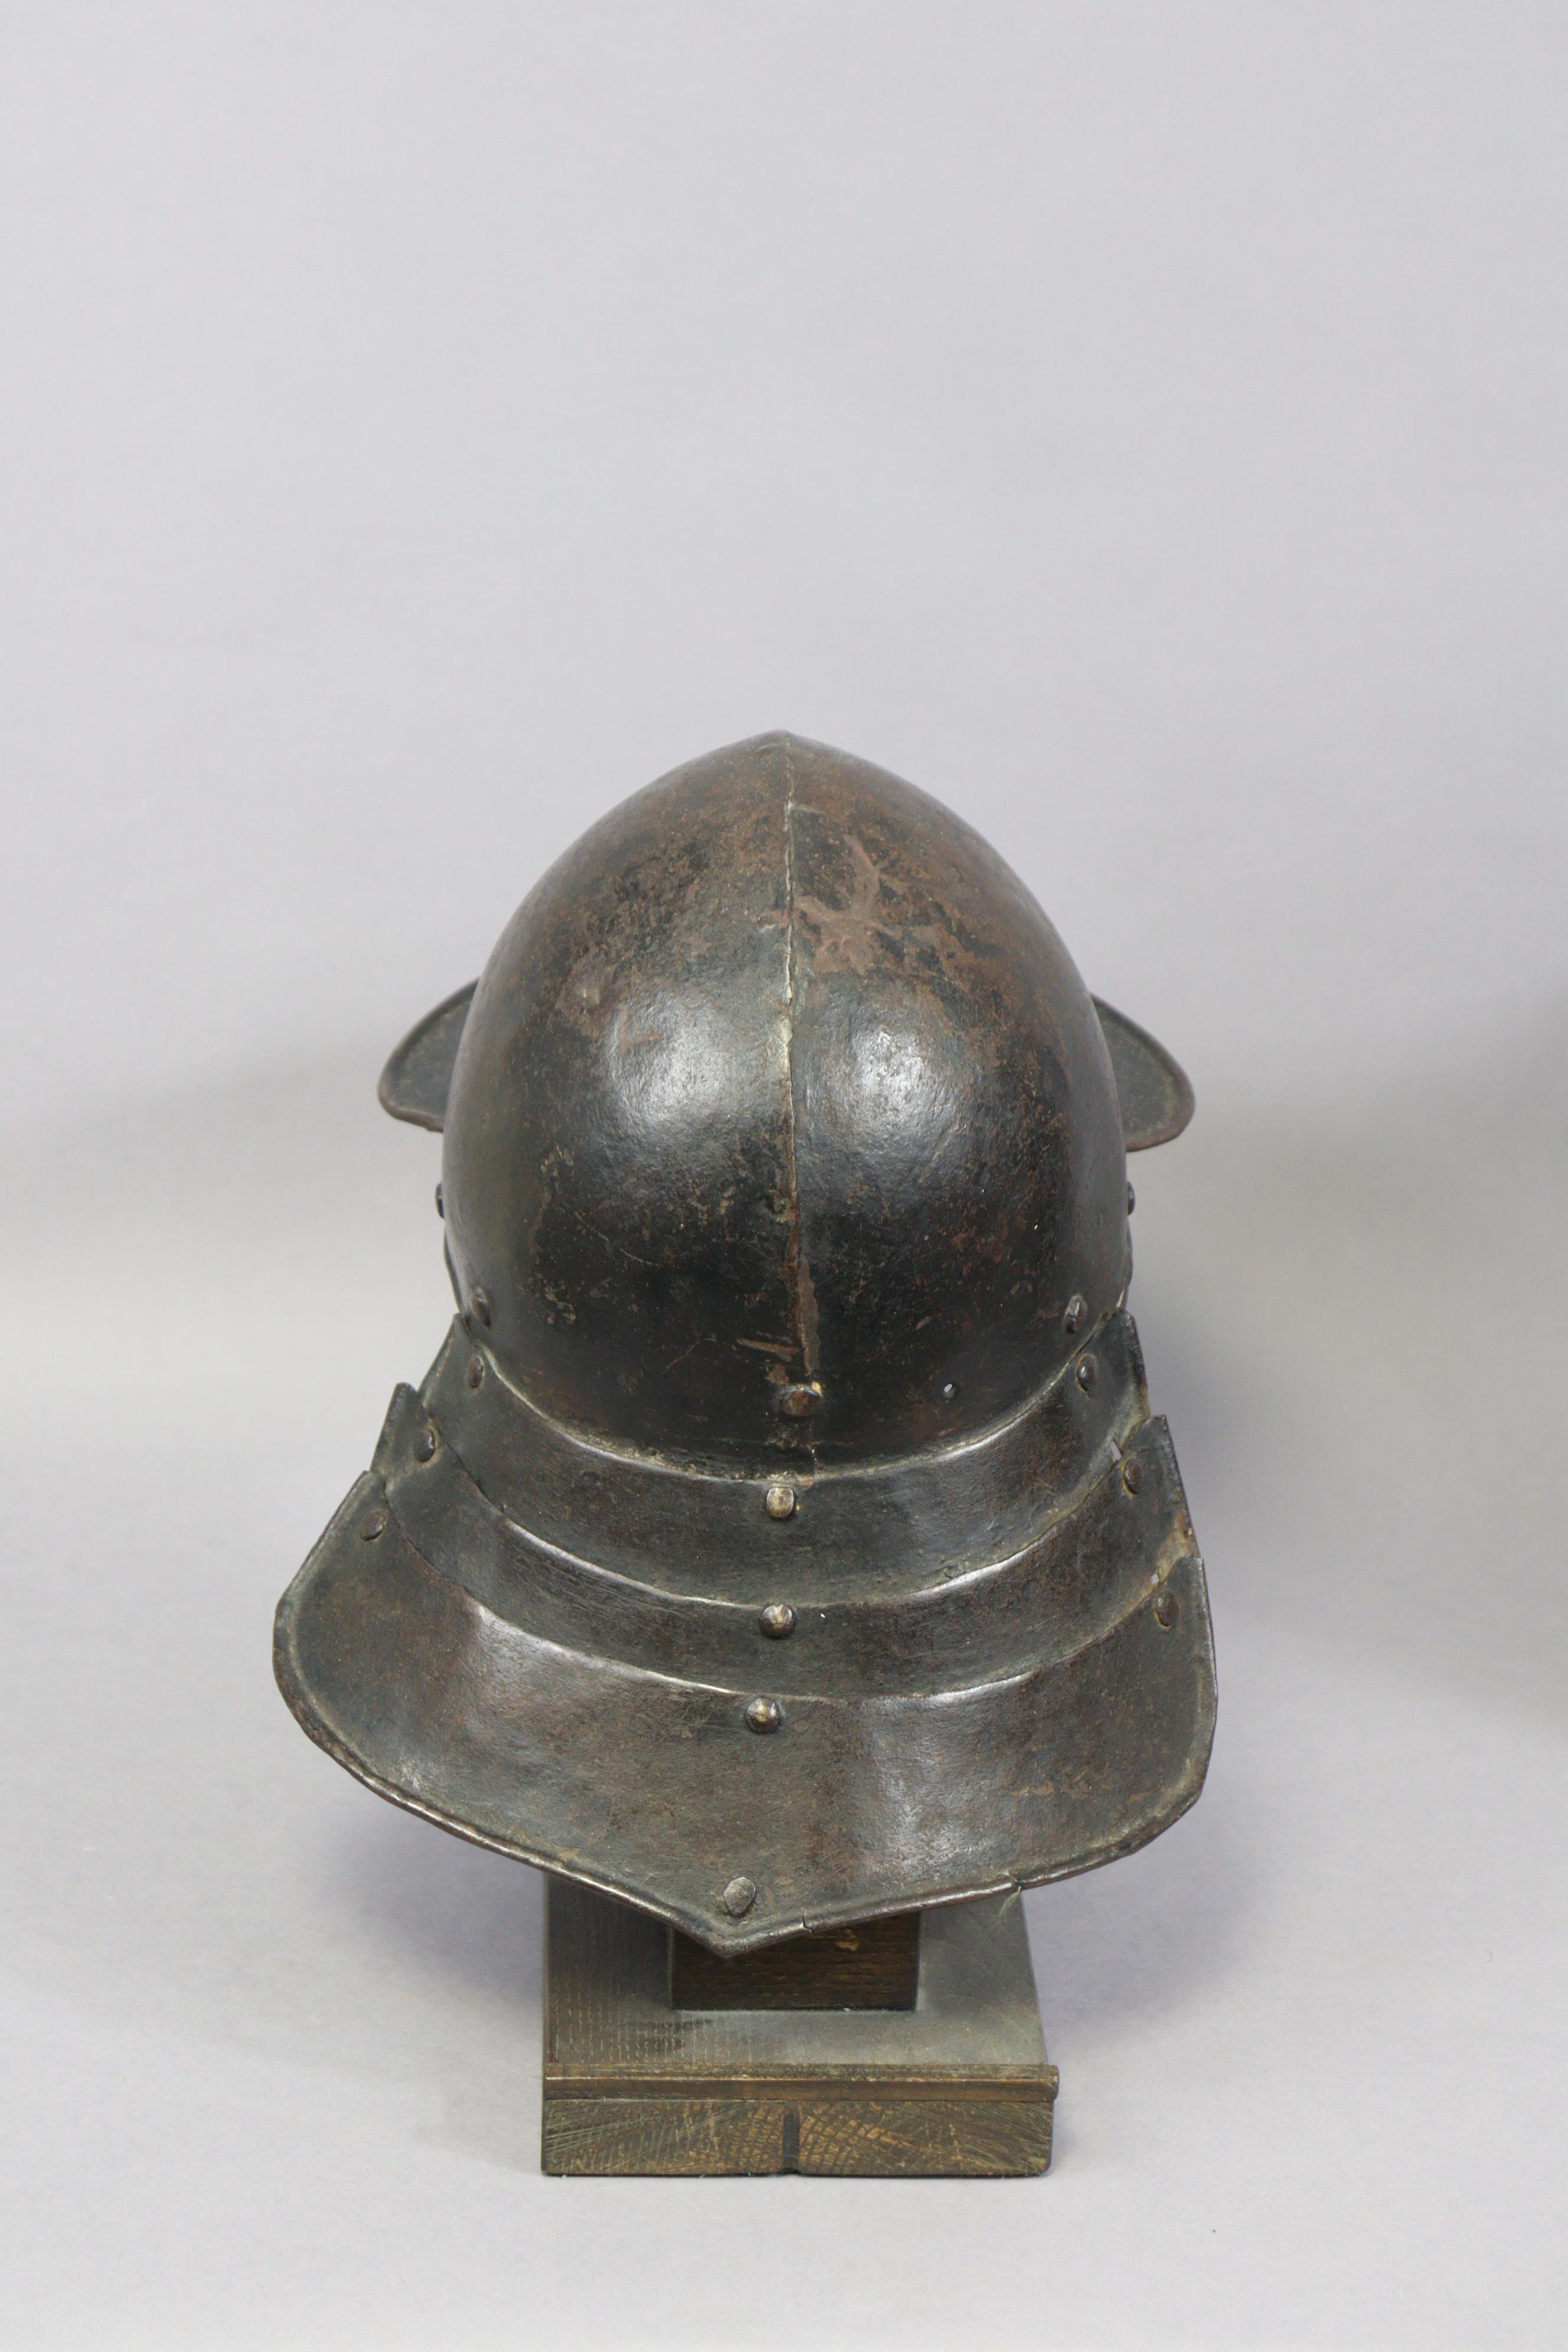 An English Civil War period lobster-tail steel helmet & breastplate, the pot helmet of typical form, - Image 5 of 11